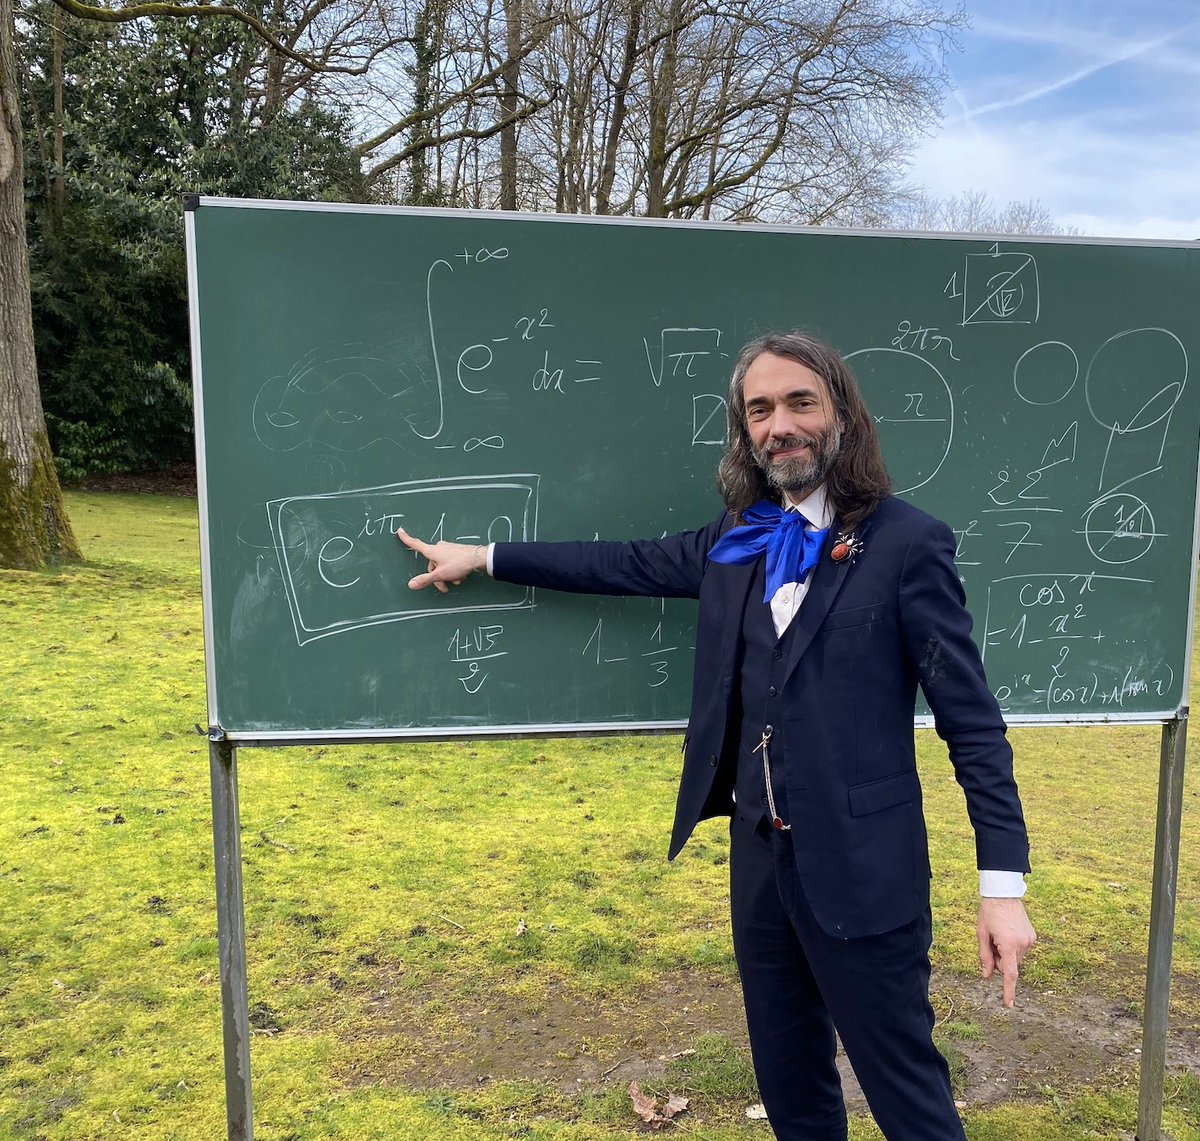 Happy Pi Day! On this international day of #mathematics, it is a pleasure to listen to @VillaniCedric, holder of the @Institut_IHES-Université de Lyon Chair in Analysis, explain through just a few equations and examples why Pi is such a fascinating number.